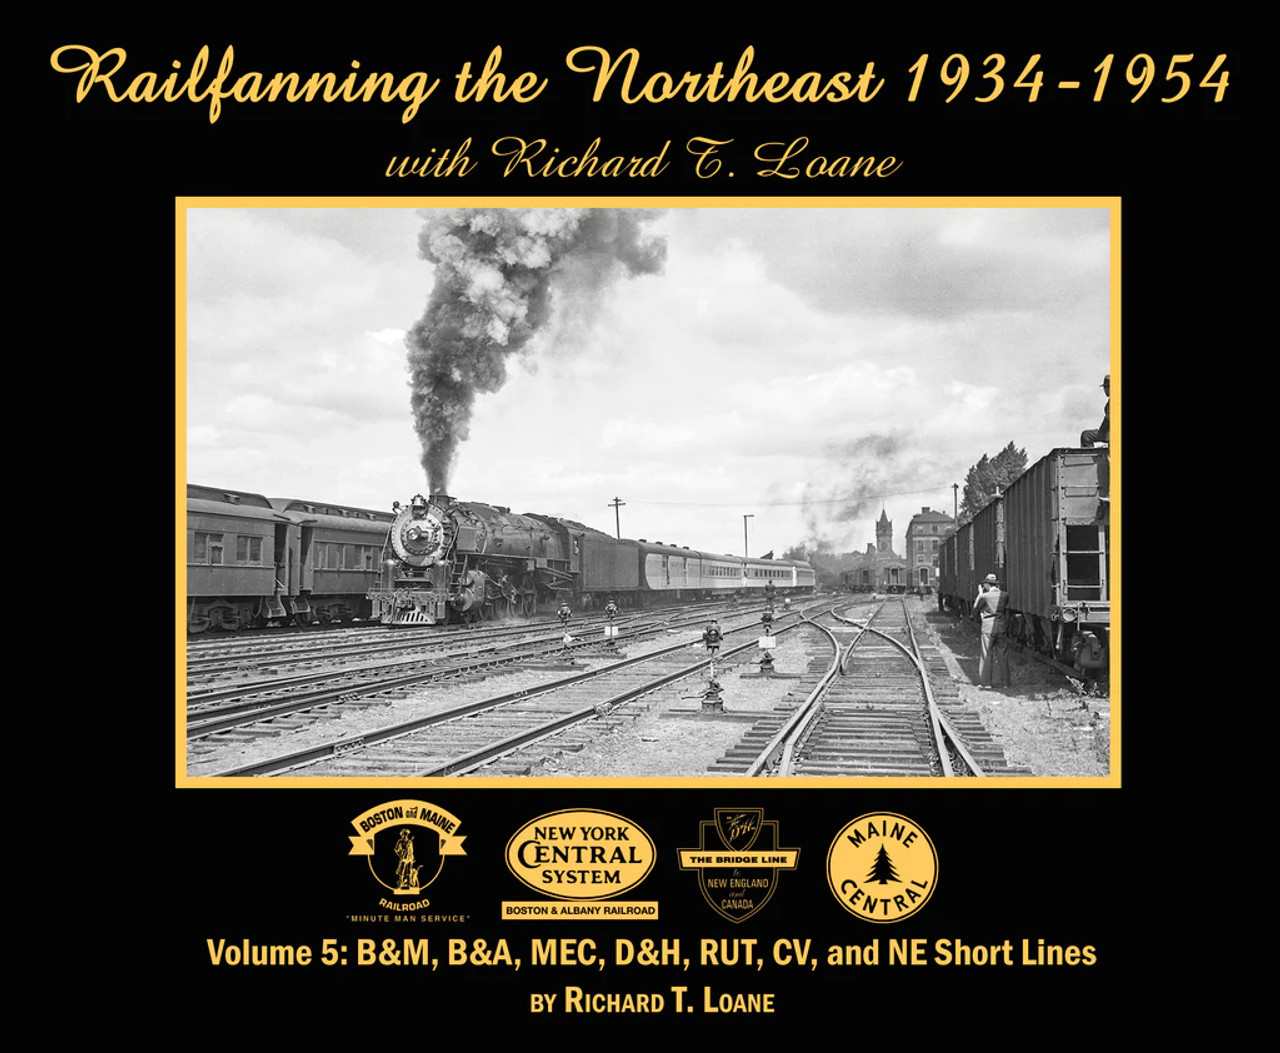 Morning Sun 7111 Railfanning the Northeast 1934-1954 with Richard T. Loane Volume 5 (Softcover)